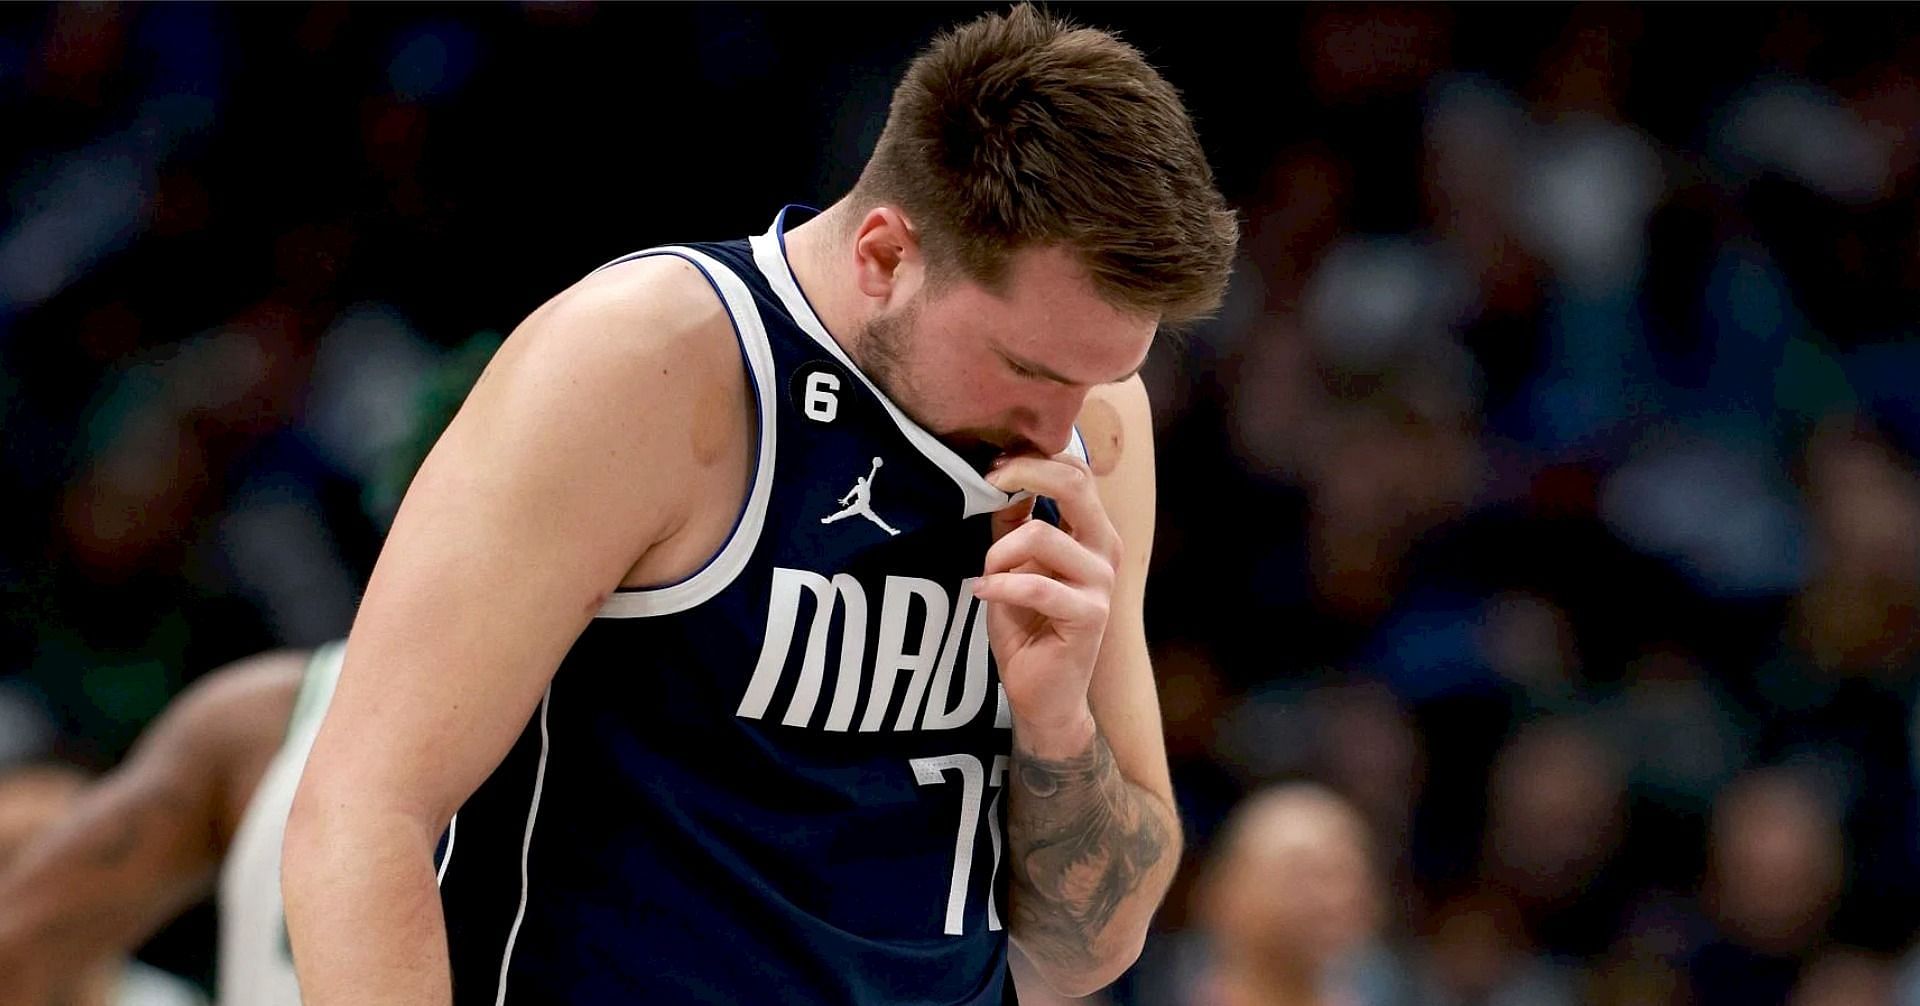 Luka Doncic shows dejected face despite 64th triple-double in terrible defensive outing for Mavericks